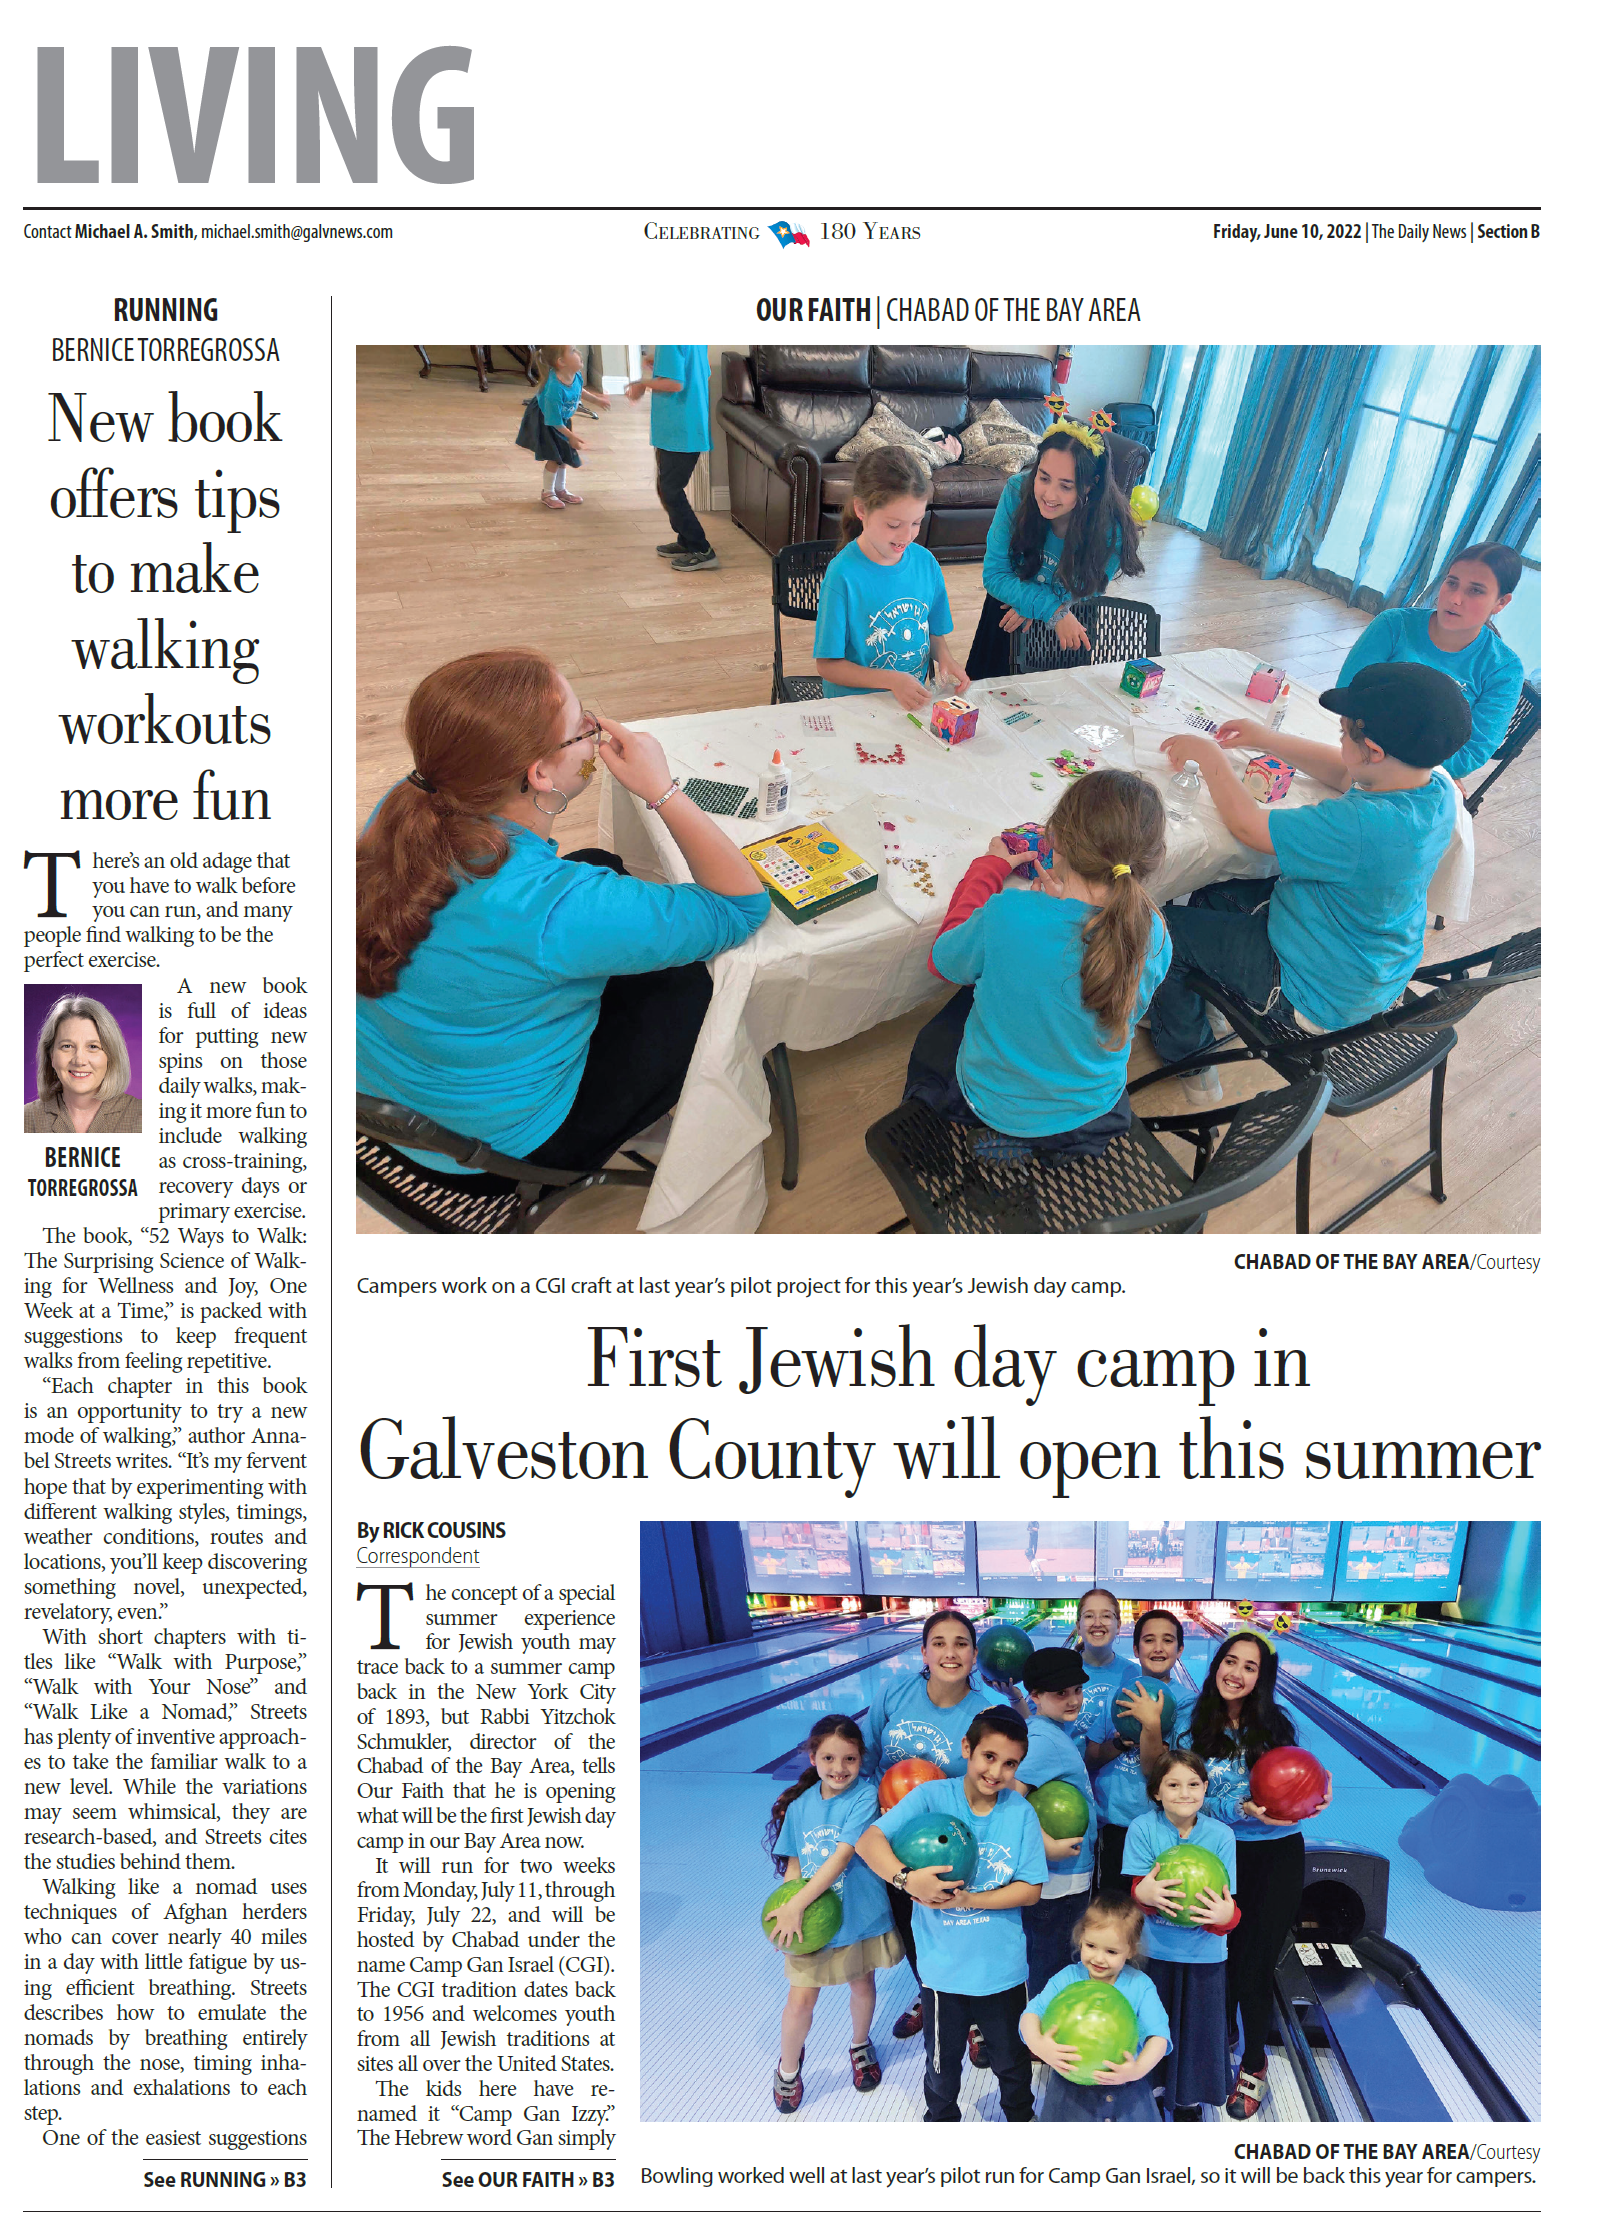 First Jewish day camp in Galveston County will open this summer